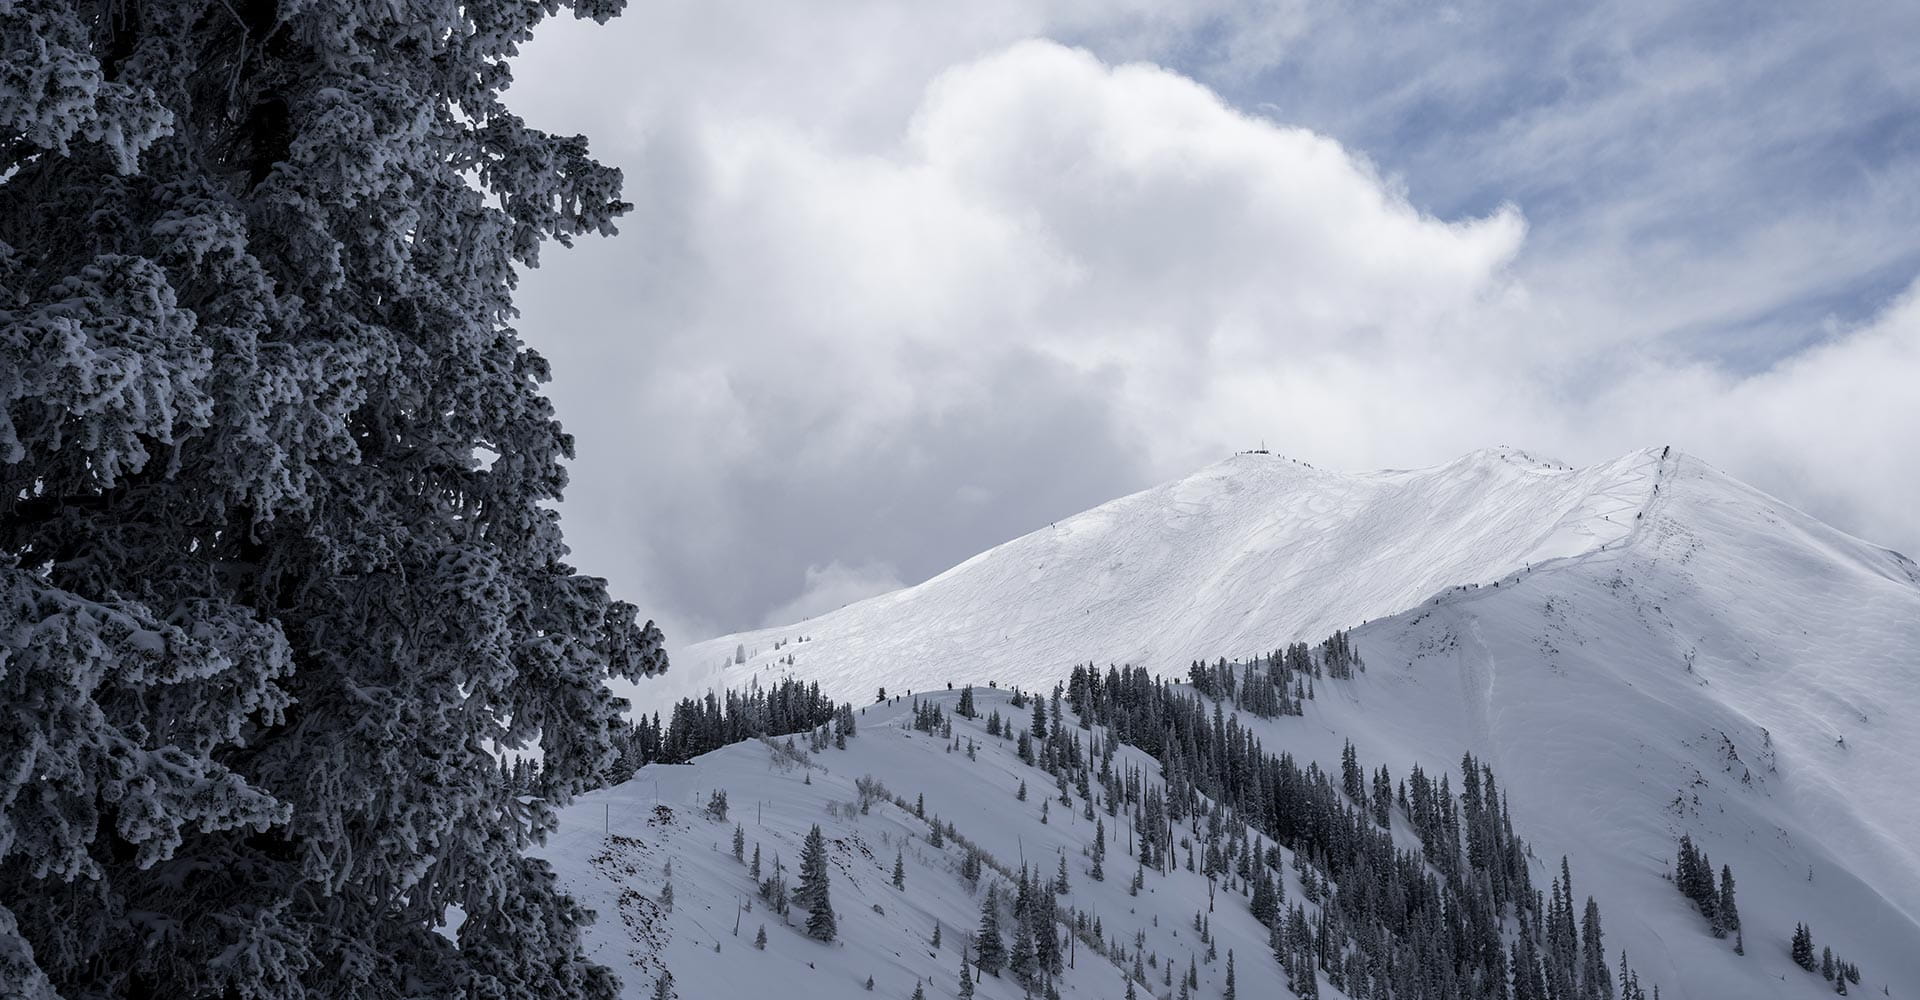 A view of Highland Bowl from atop Aspen Highlands.